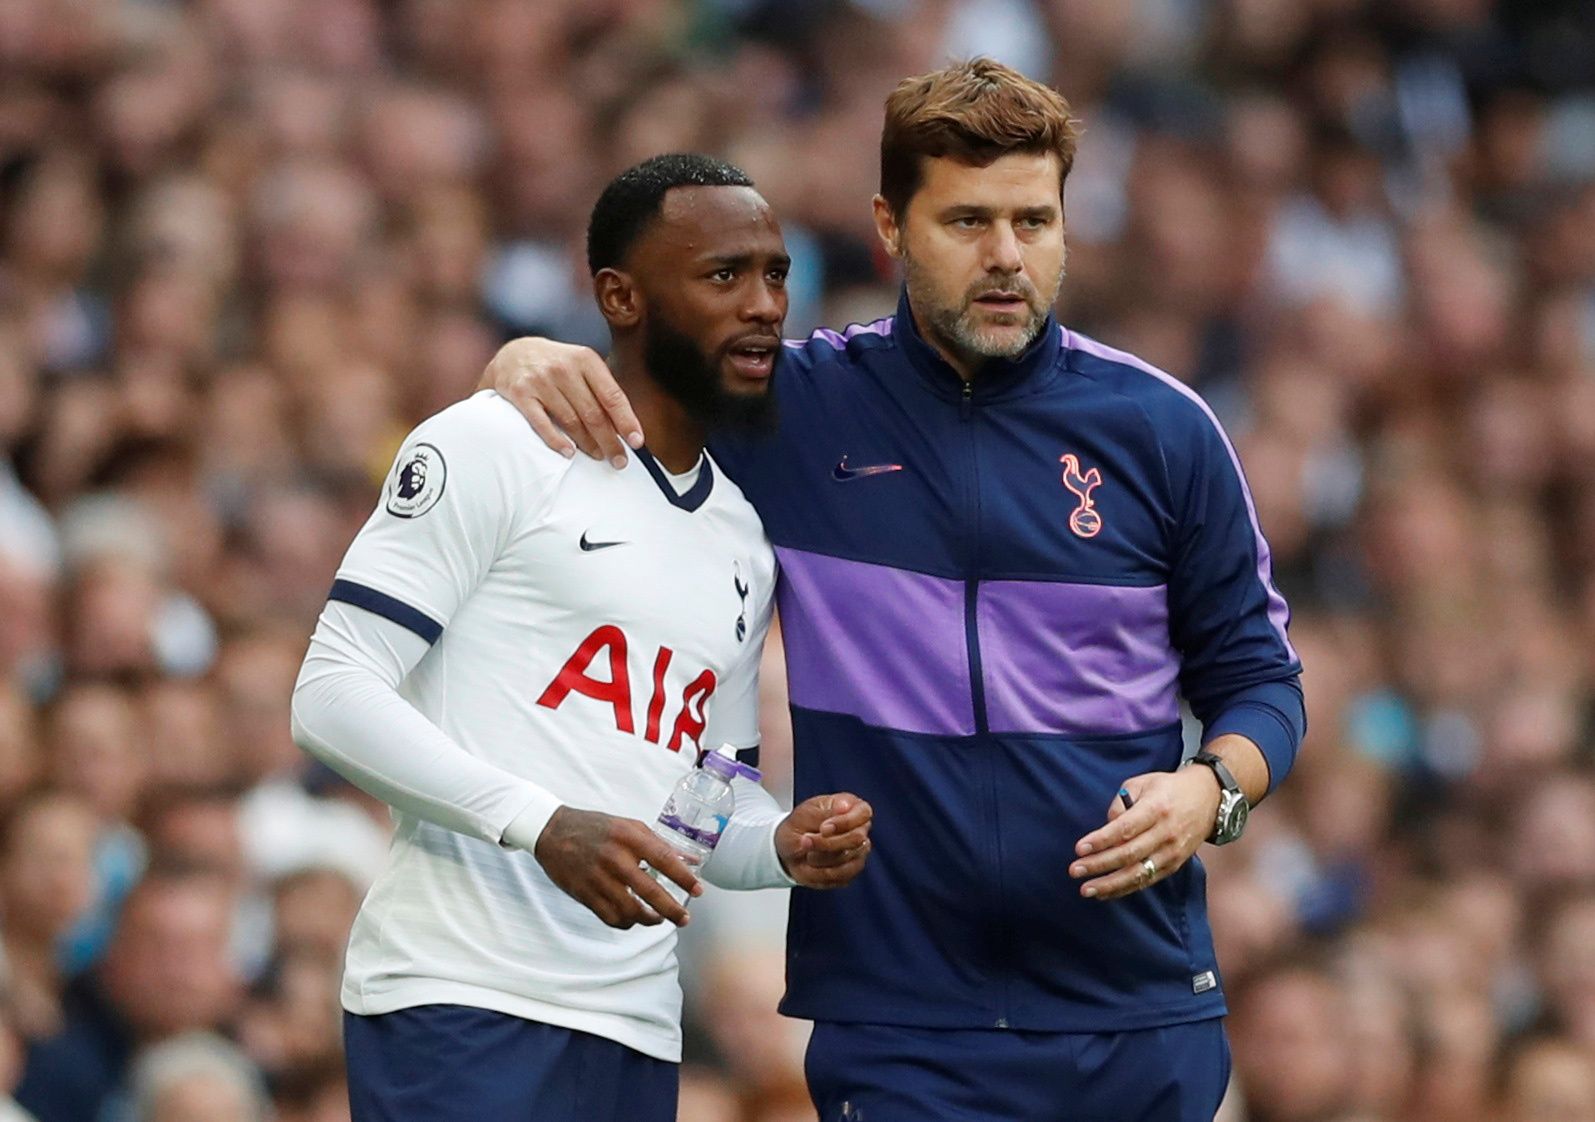 Soccer Football - Premier League - Tottenham Hotspur v Aston Villa - Tottenham Hotspur Stadium, London, Britain - August 10, 2019  Tottenham Hotspur manager Mauricio Pochettino with substitute Georges-Kevin Nkoudou   Action Images via Reuters/Matthew Childs  EDITORIAL USE ONLY. No use with unauthorized audio, video, data, fixture lists, club/league logos or 